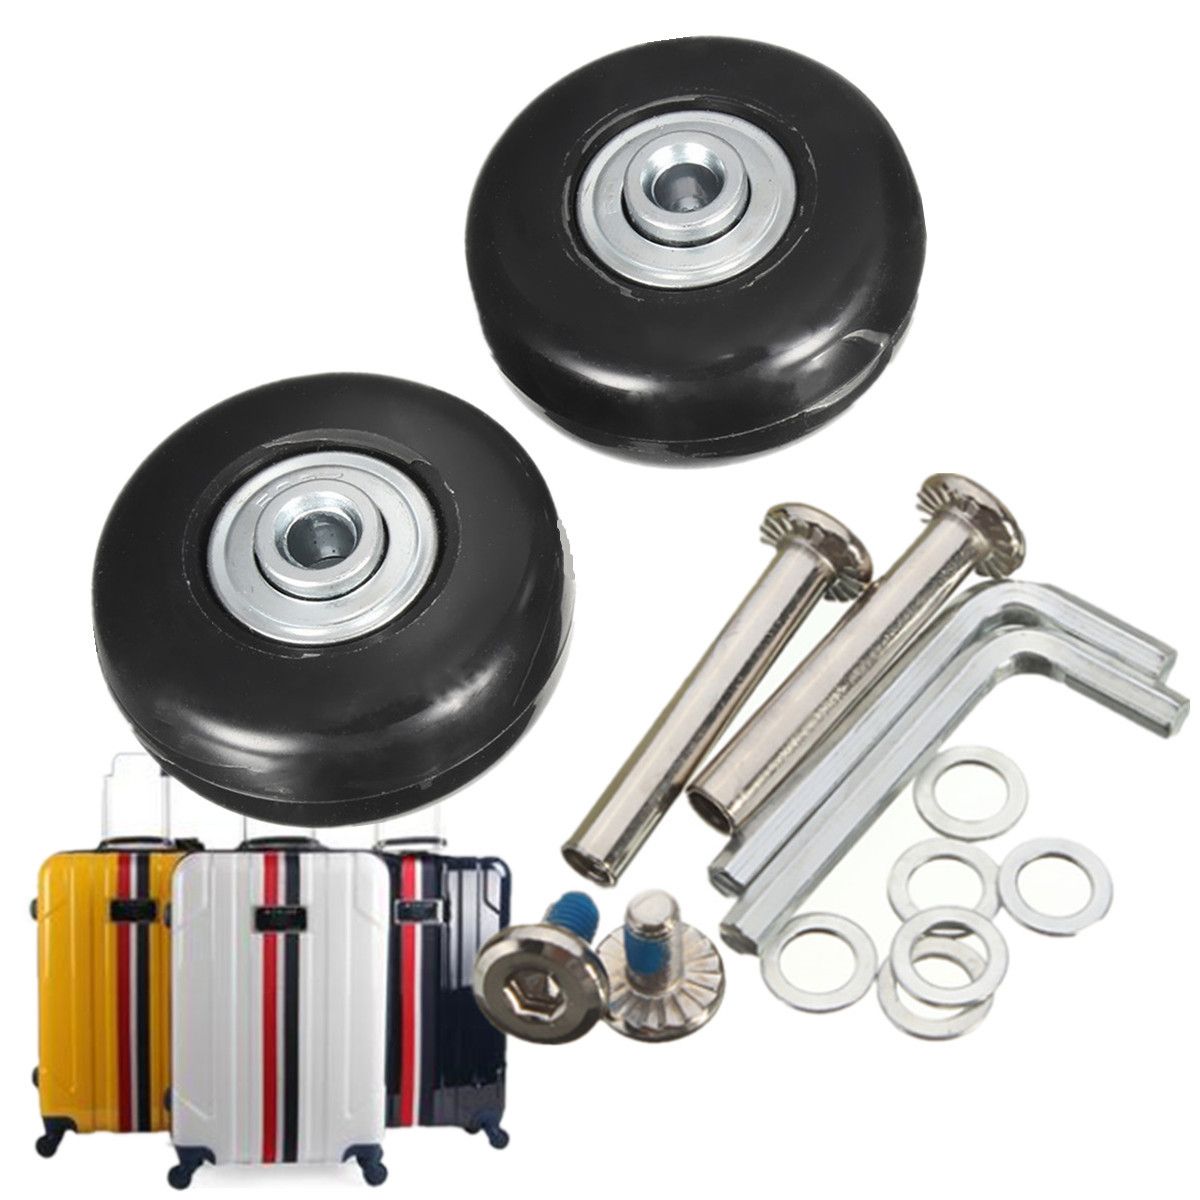 2-Sets-Luggage-Suitcase-Replacement-Wheels-OD-43-ID-6-W-18-Axles-30-Repair-Tools-1005576